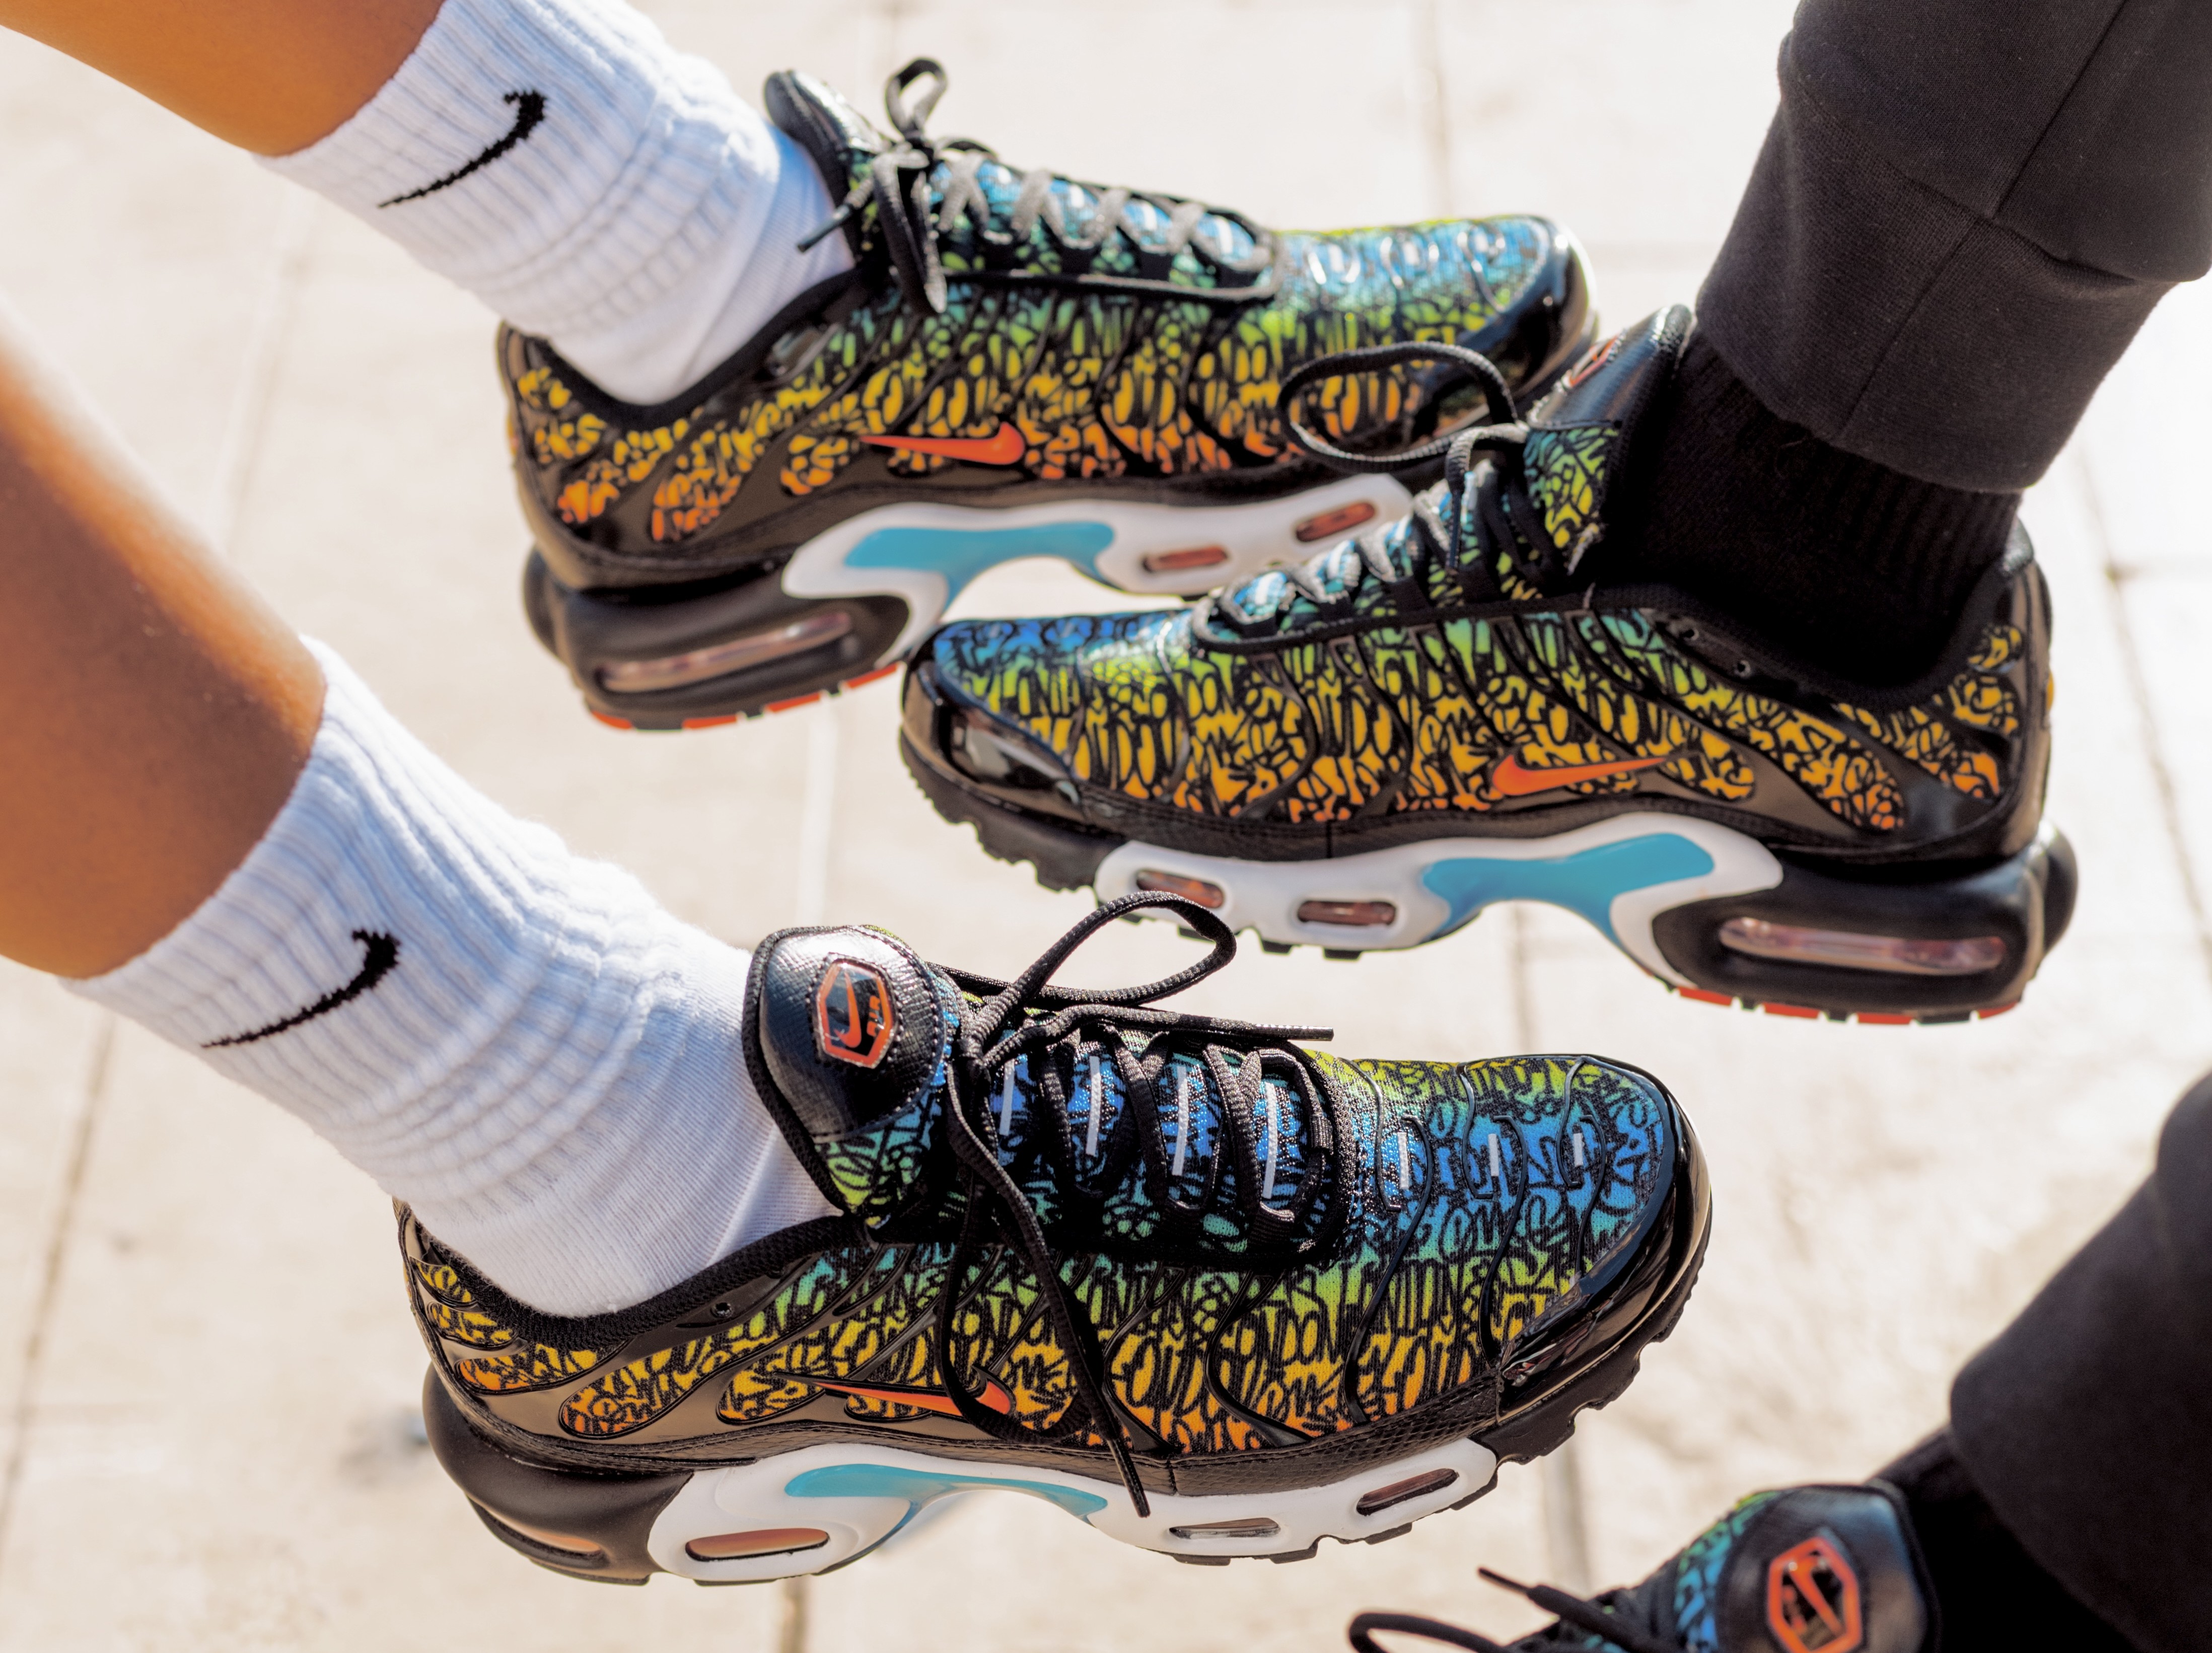 Buy Air Max Plus Shoes: New Releases & Iconic Styles